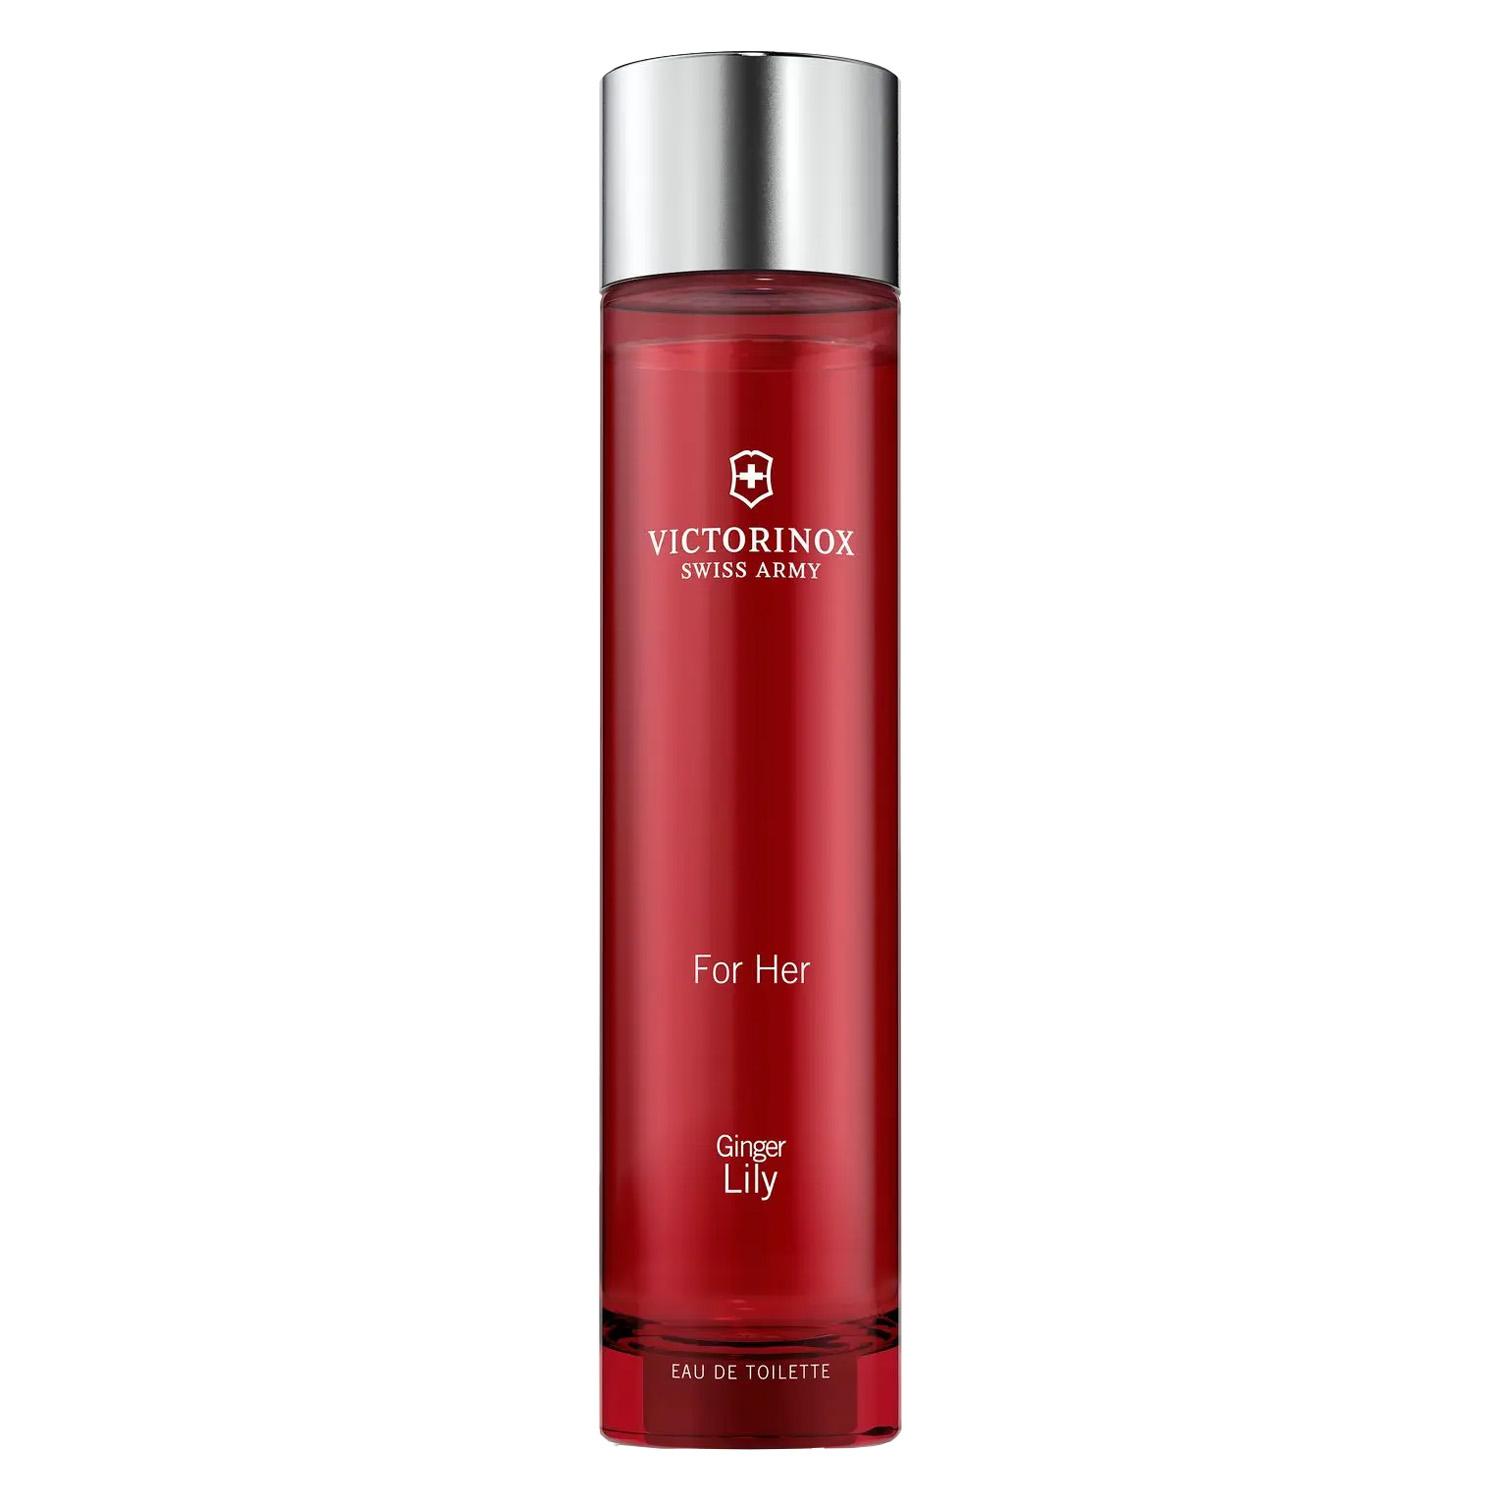 Victorinox Swiss Army - For Her Ginger Lily Eau de Toilette